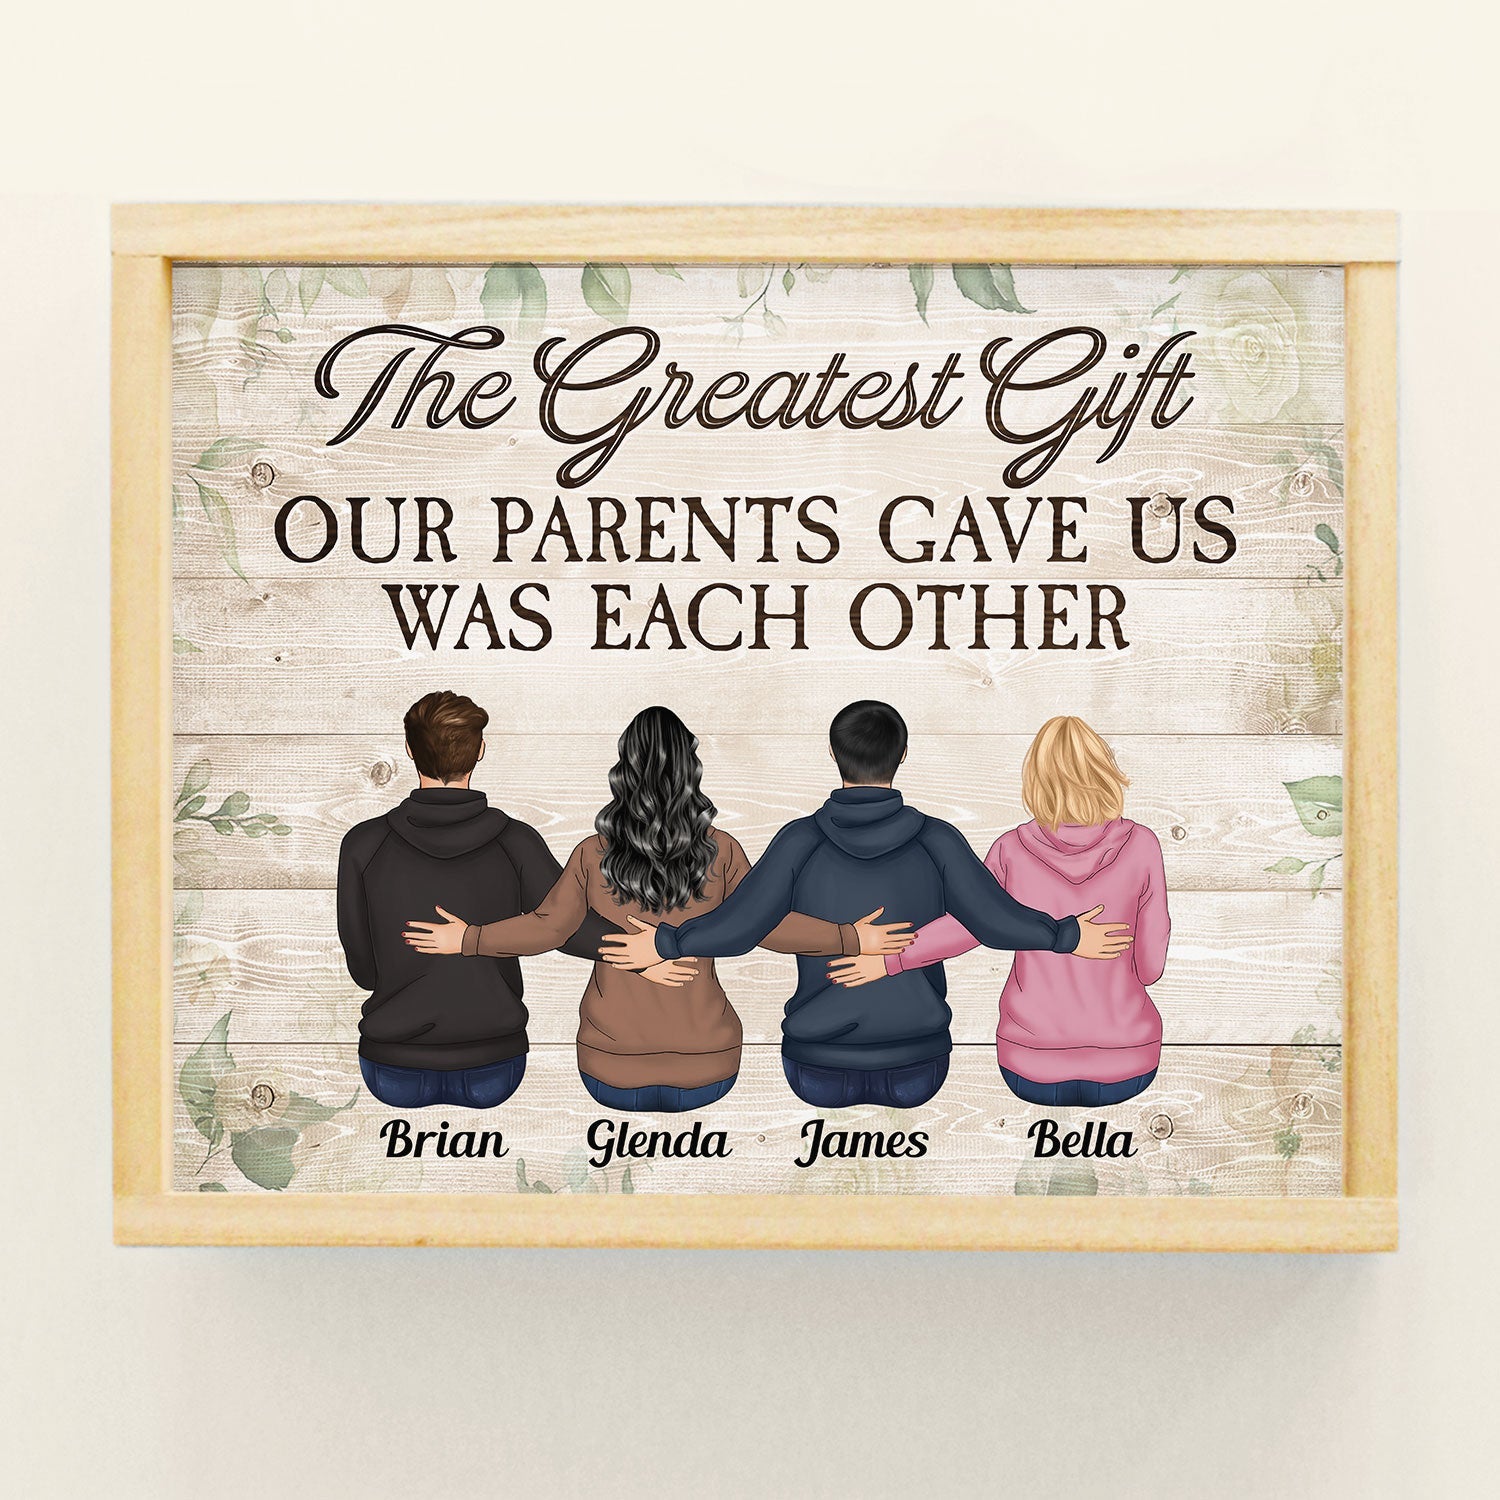 The Greatest Gift for Your Parent? Ask What They Want